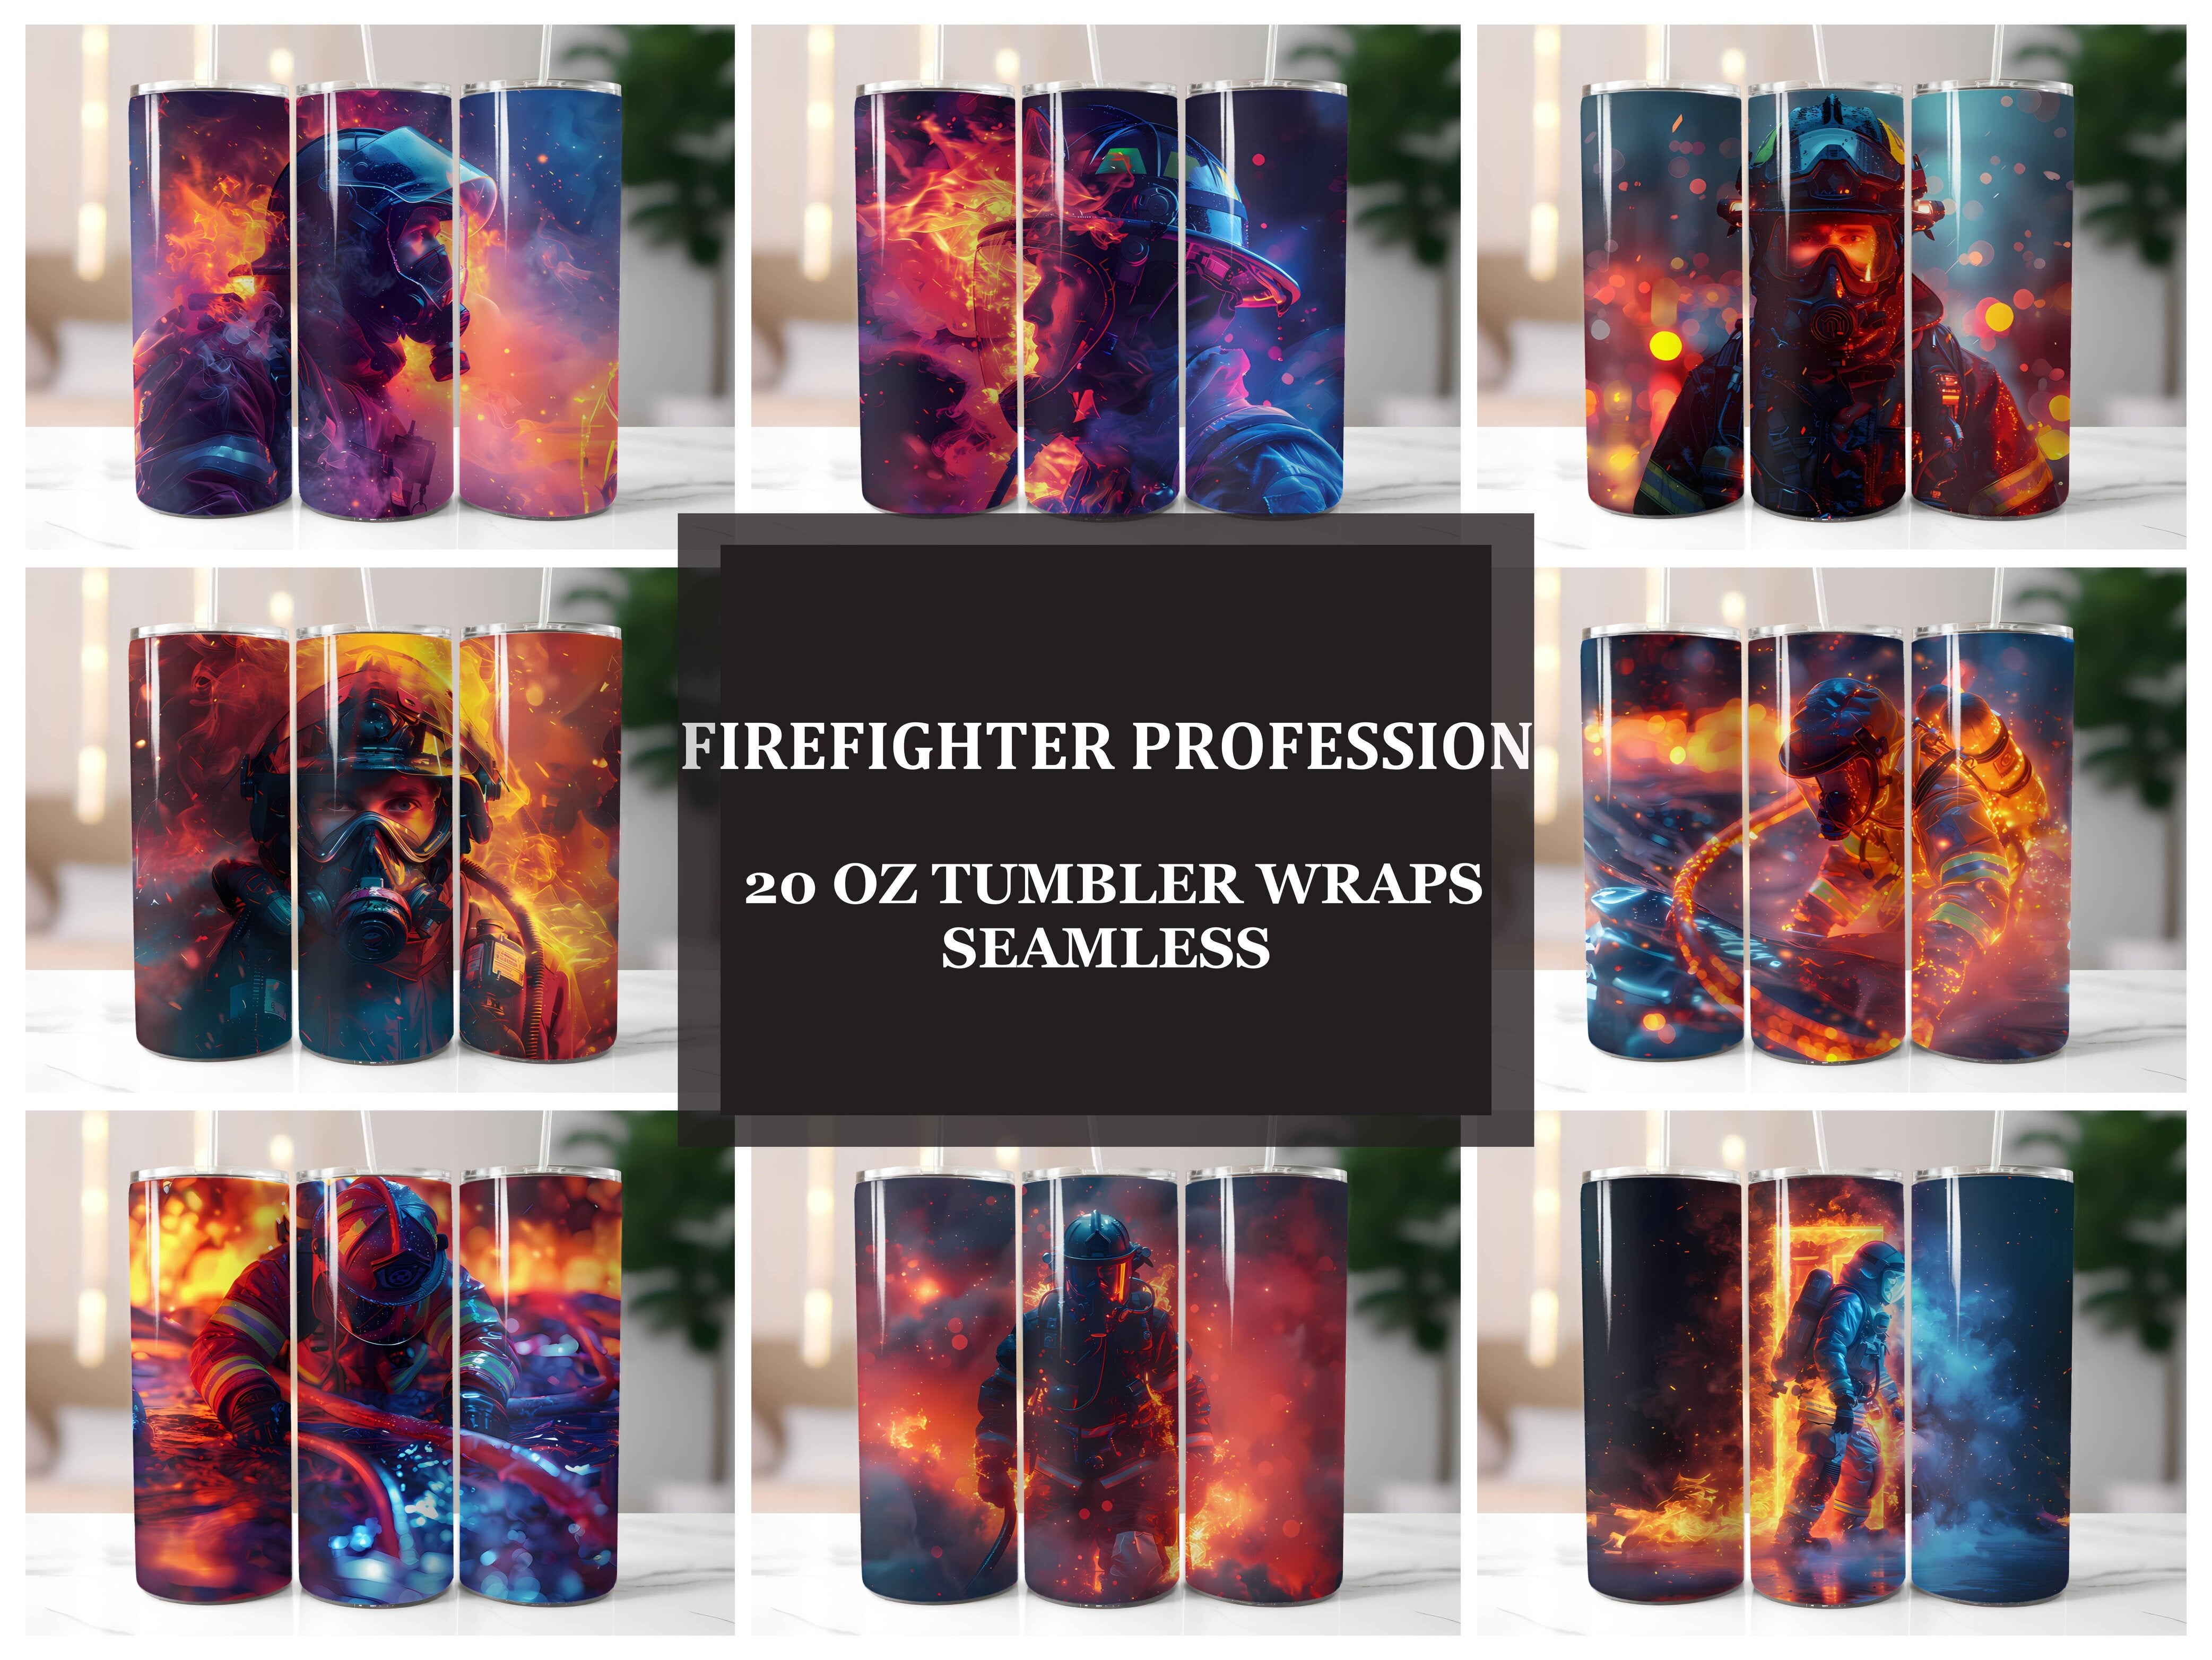 Firefighter Profession 3 Tumbler Wrap